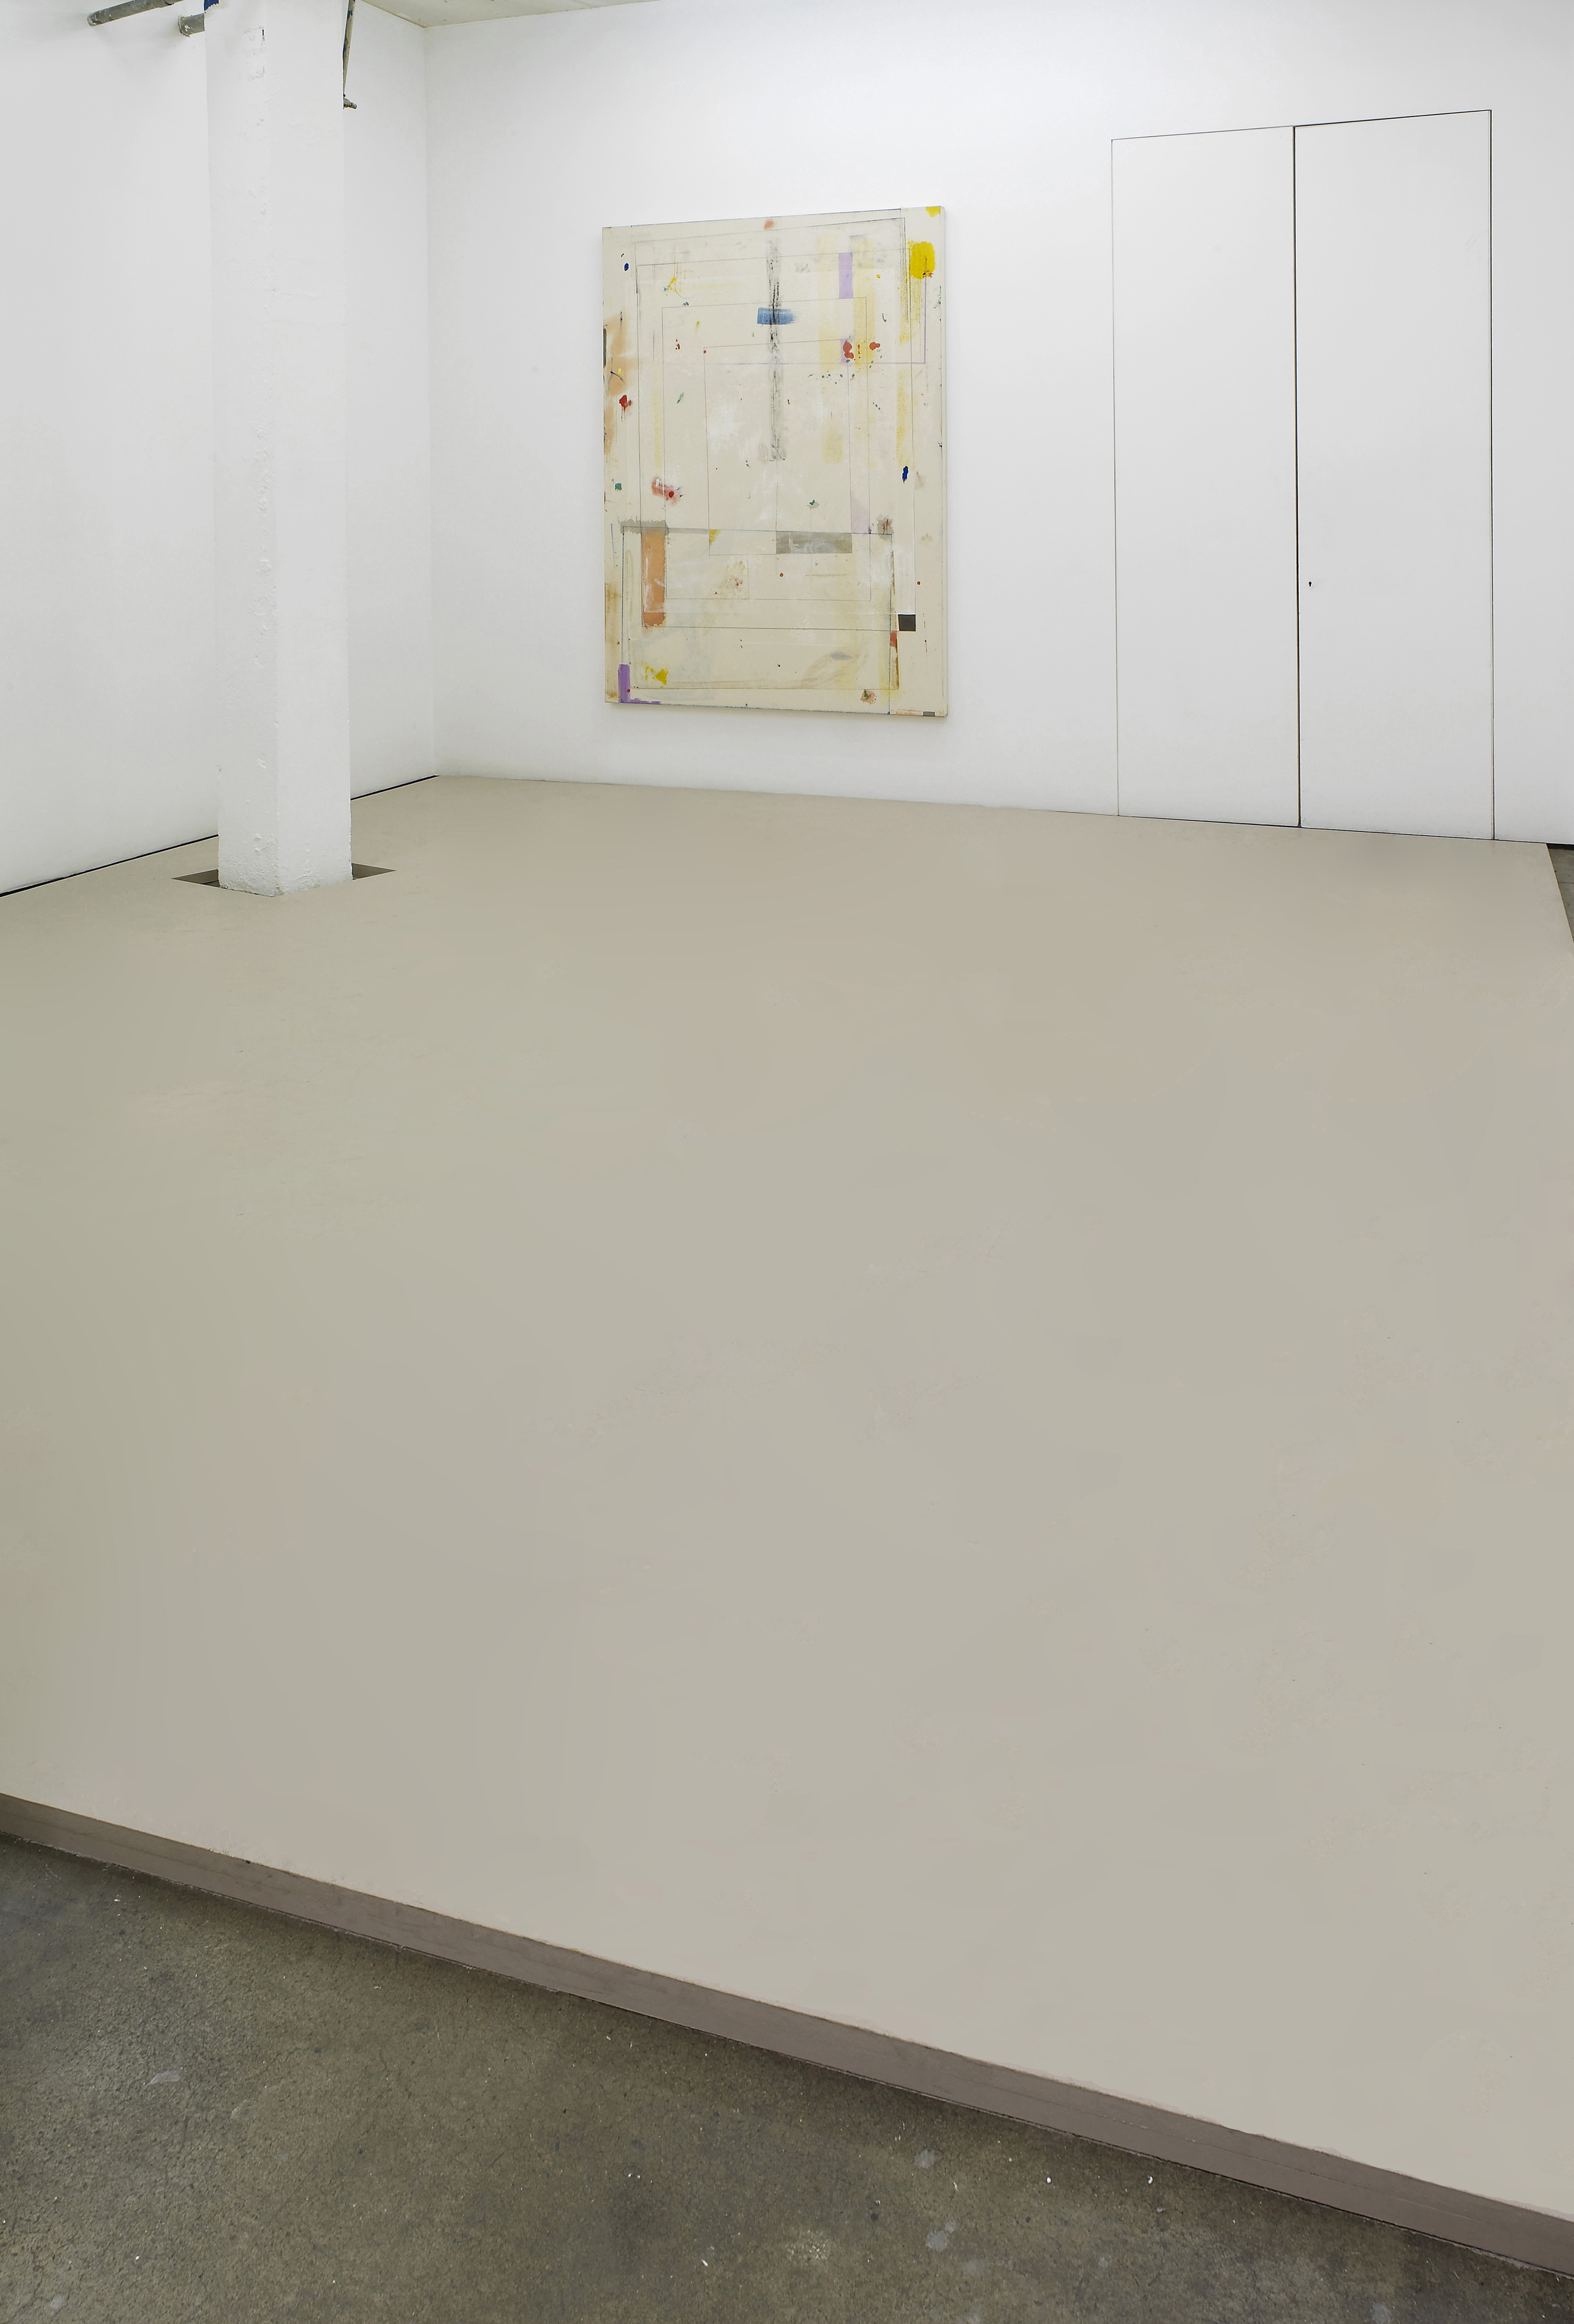     Matt Connors a poem is two words 2012 Acrylic, wood Dimensions variable 